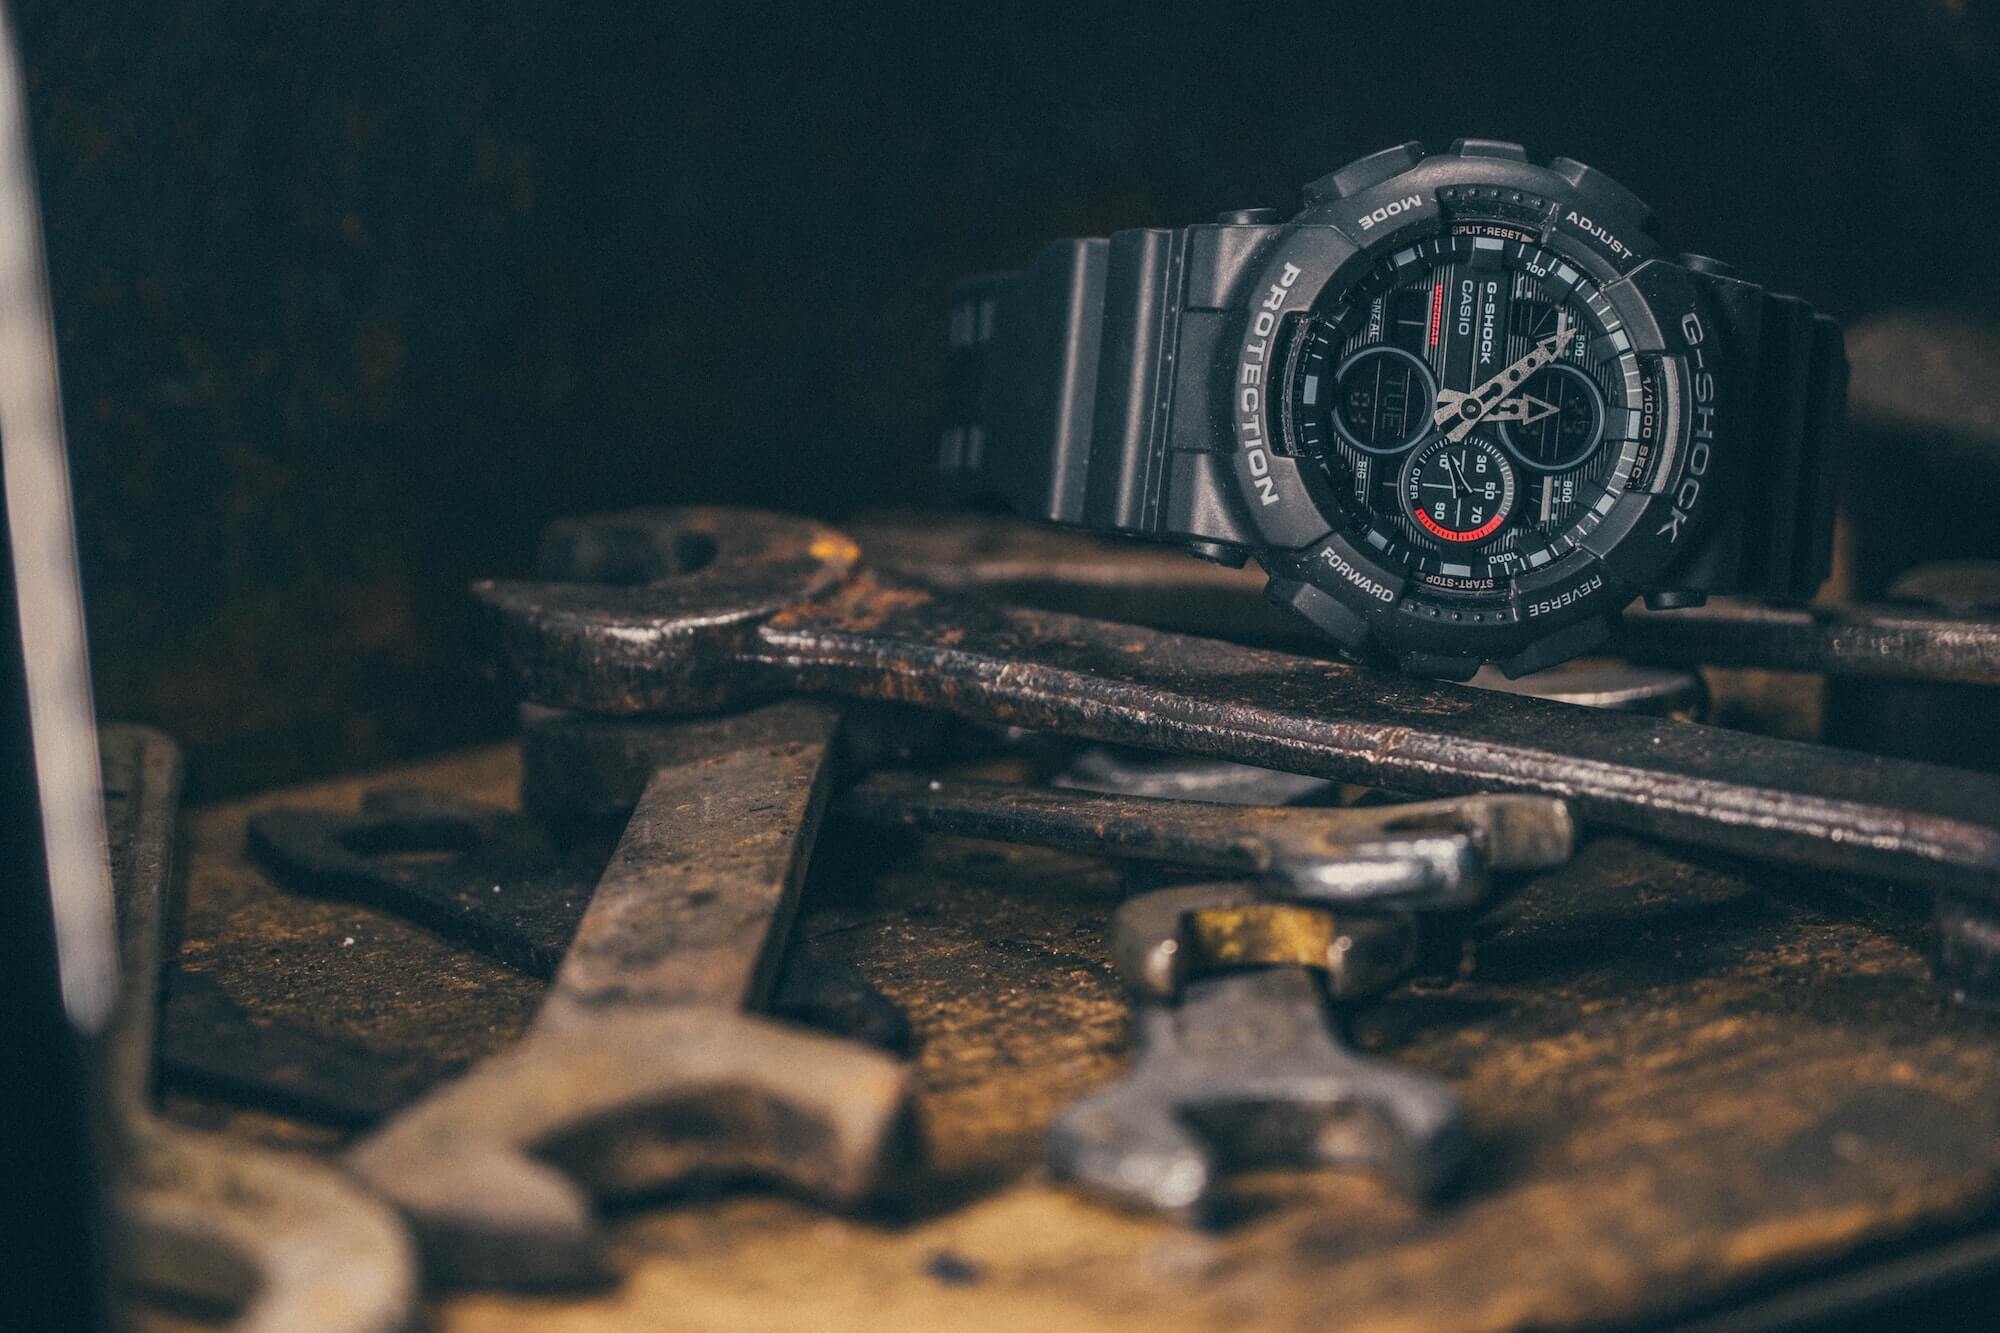 Durable Casio G-Shock displayed on a bed of metal tools